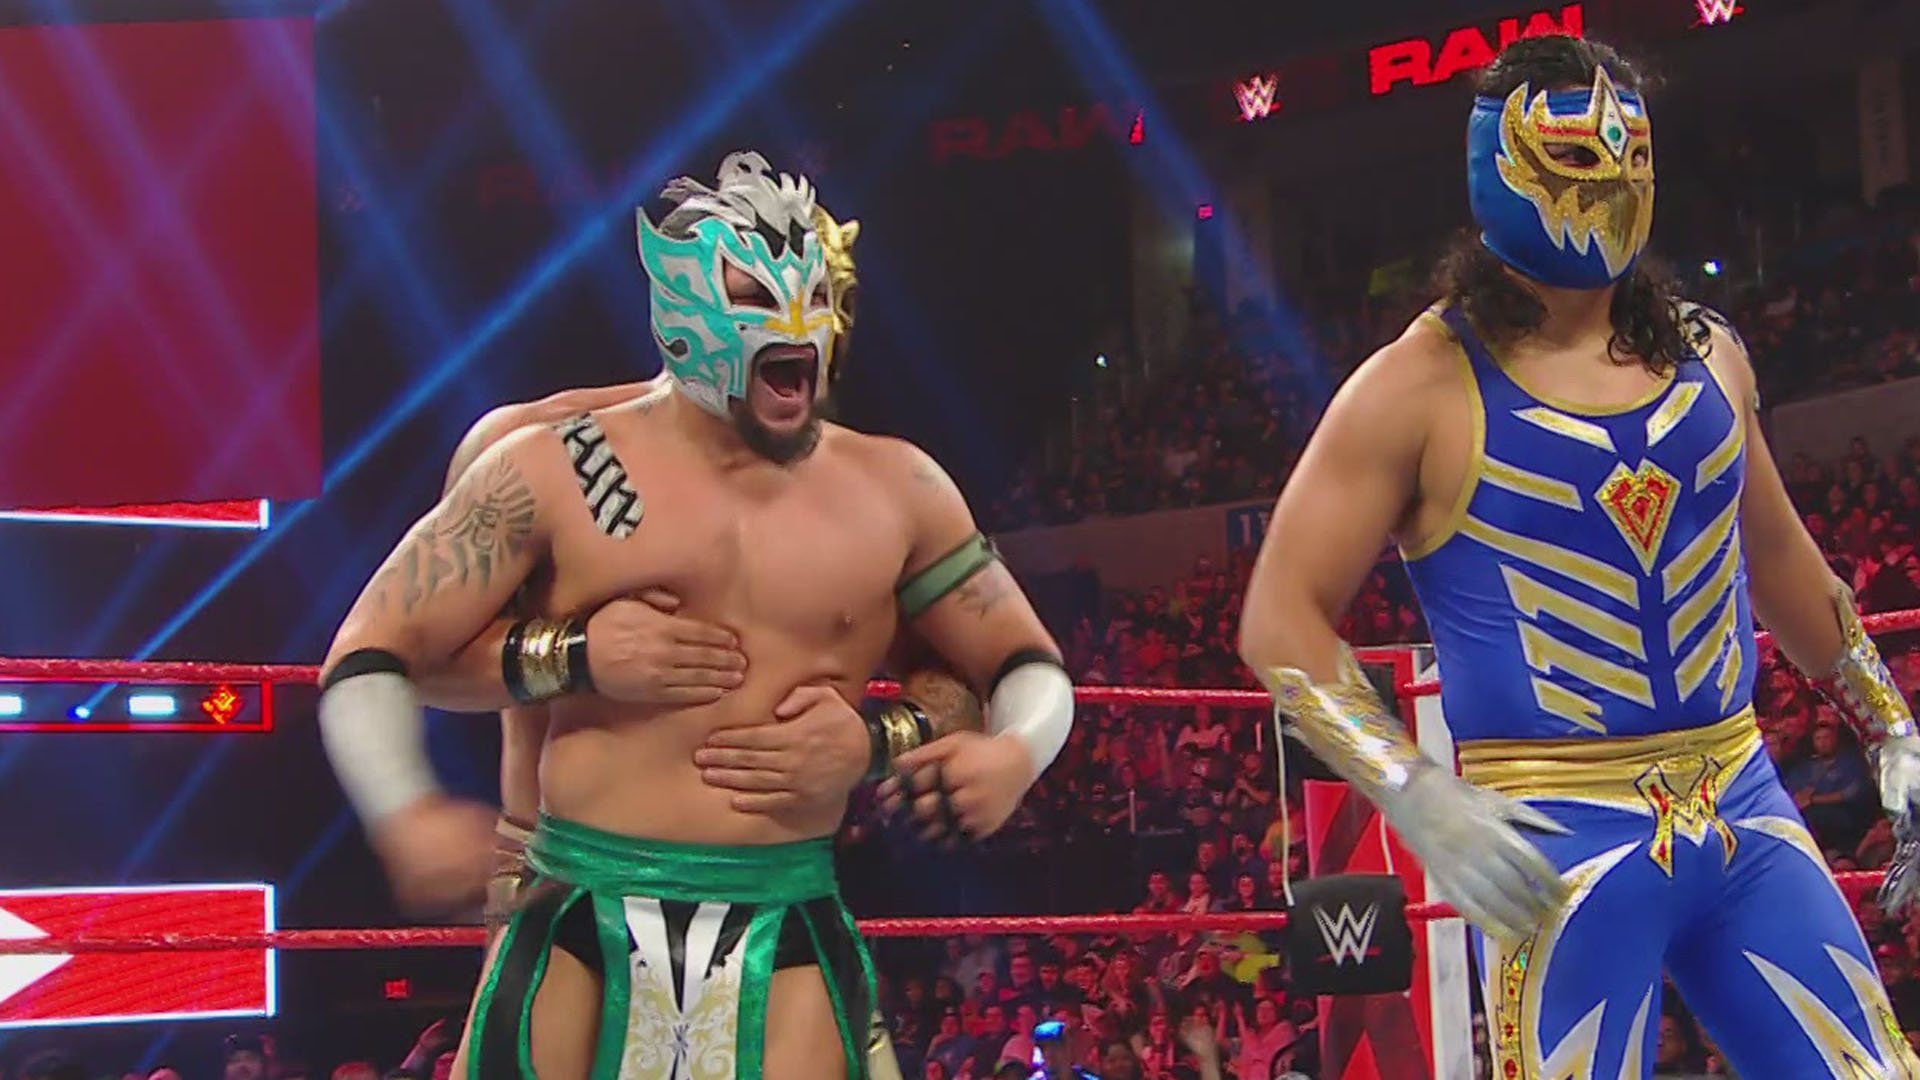 The Lucha House Party def. Jinder Mahal & The Singh Brothers. Big